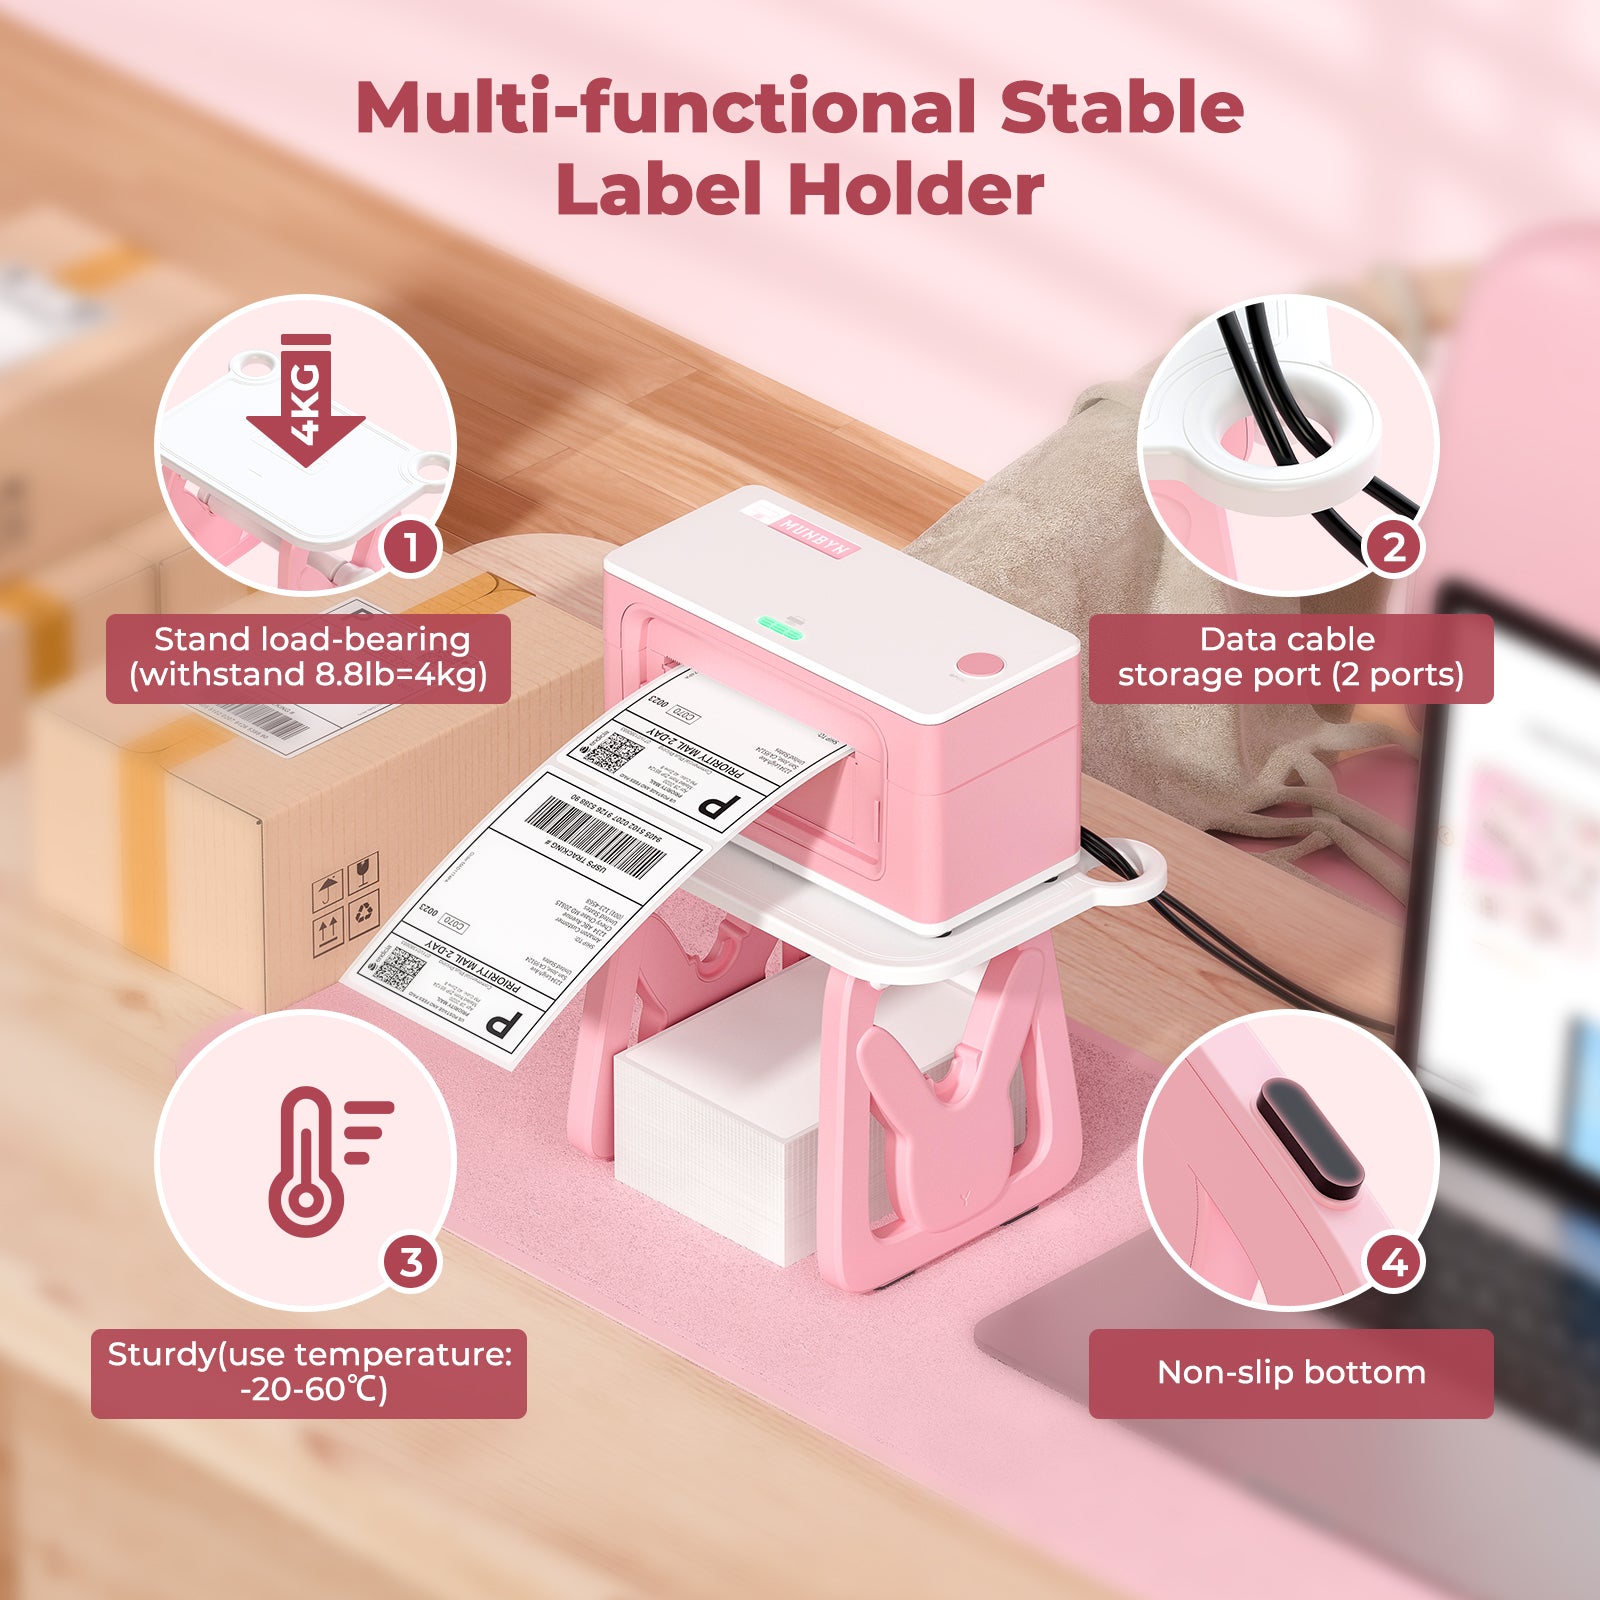 The bundle includes a newly-designed, sturdy, and multifunctional MUNBYN pink label holder.